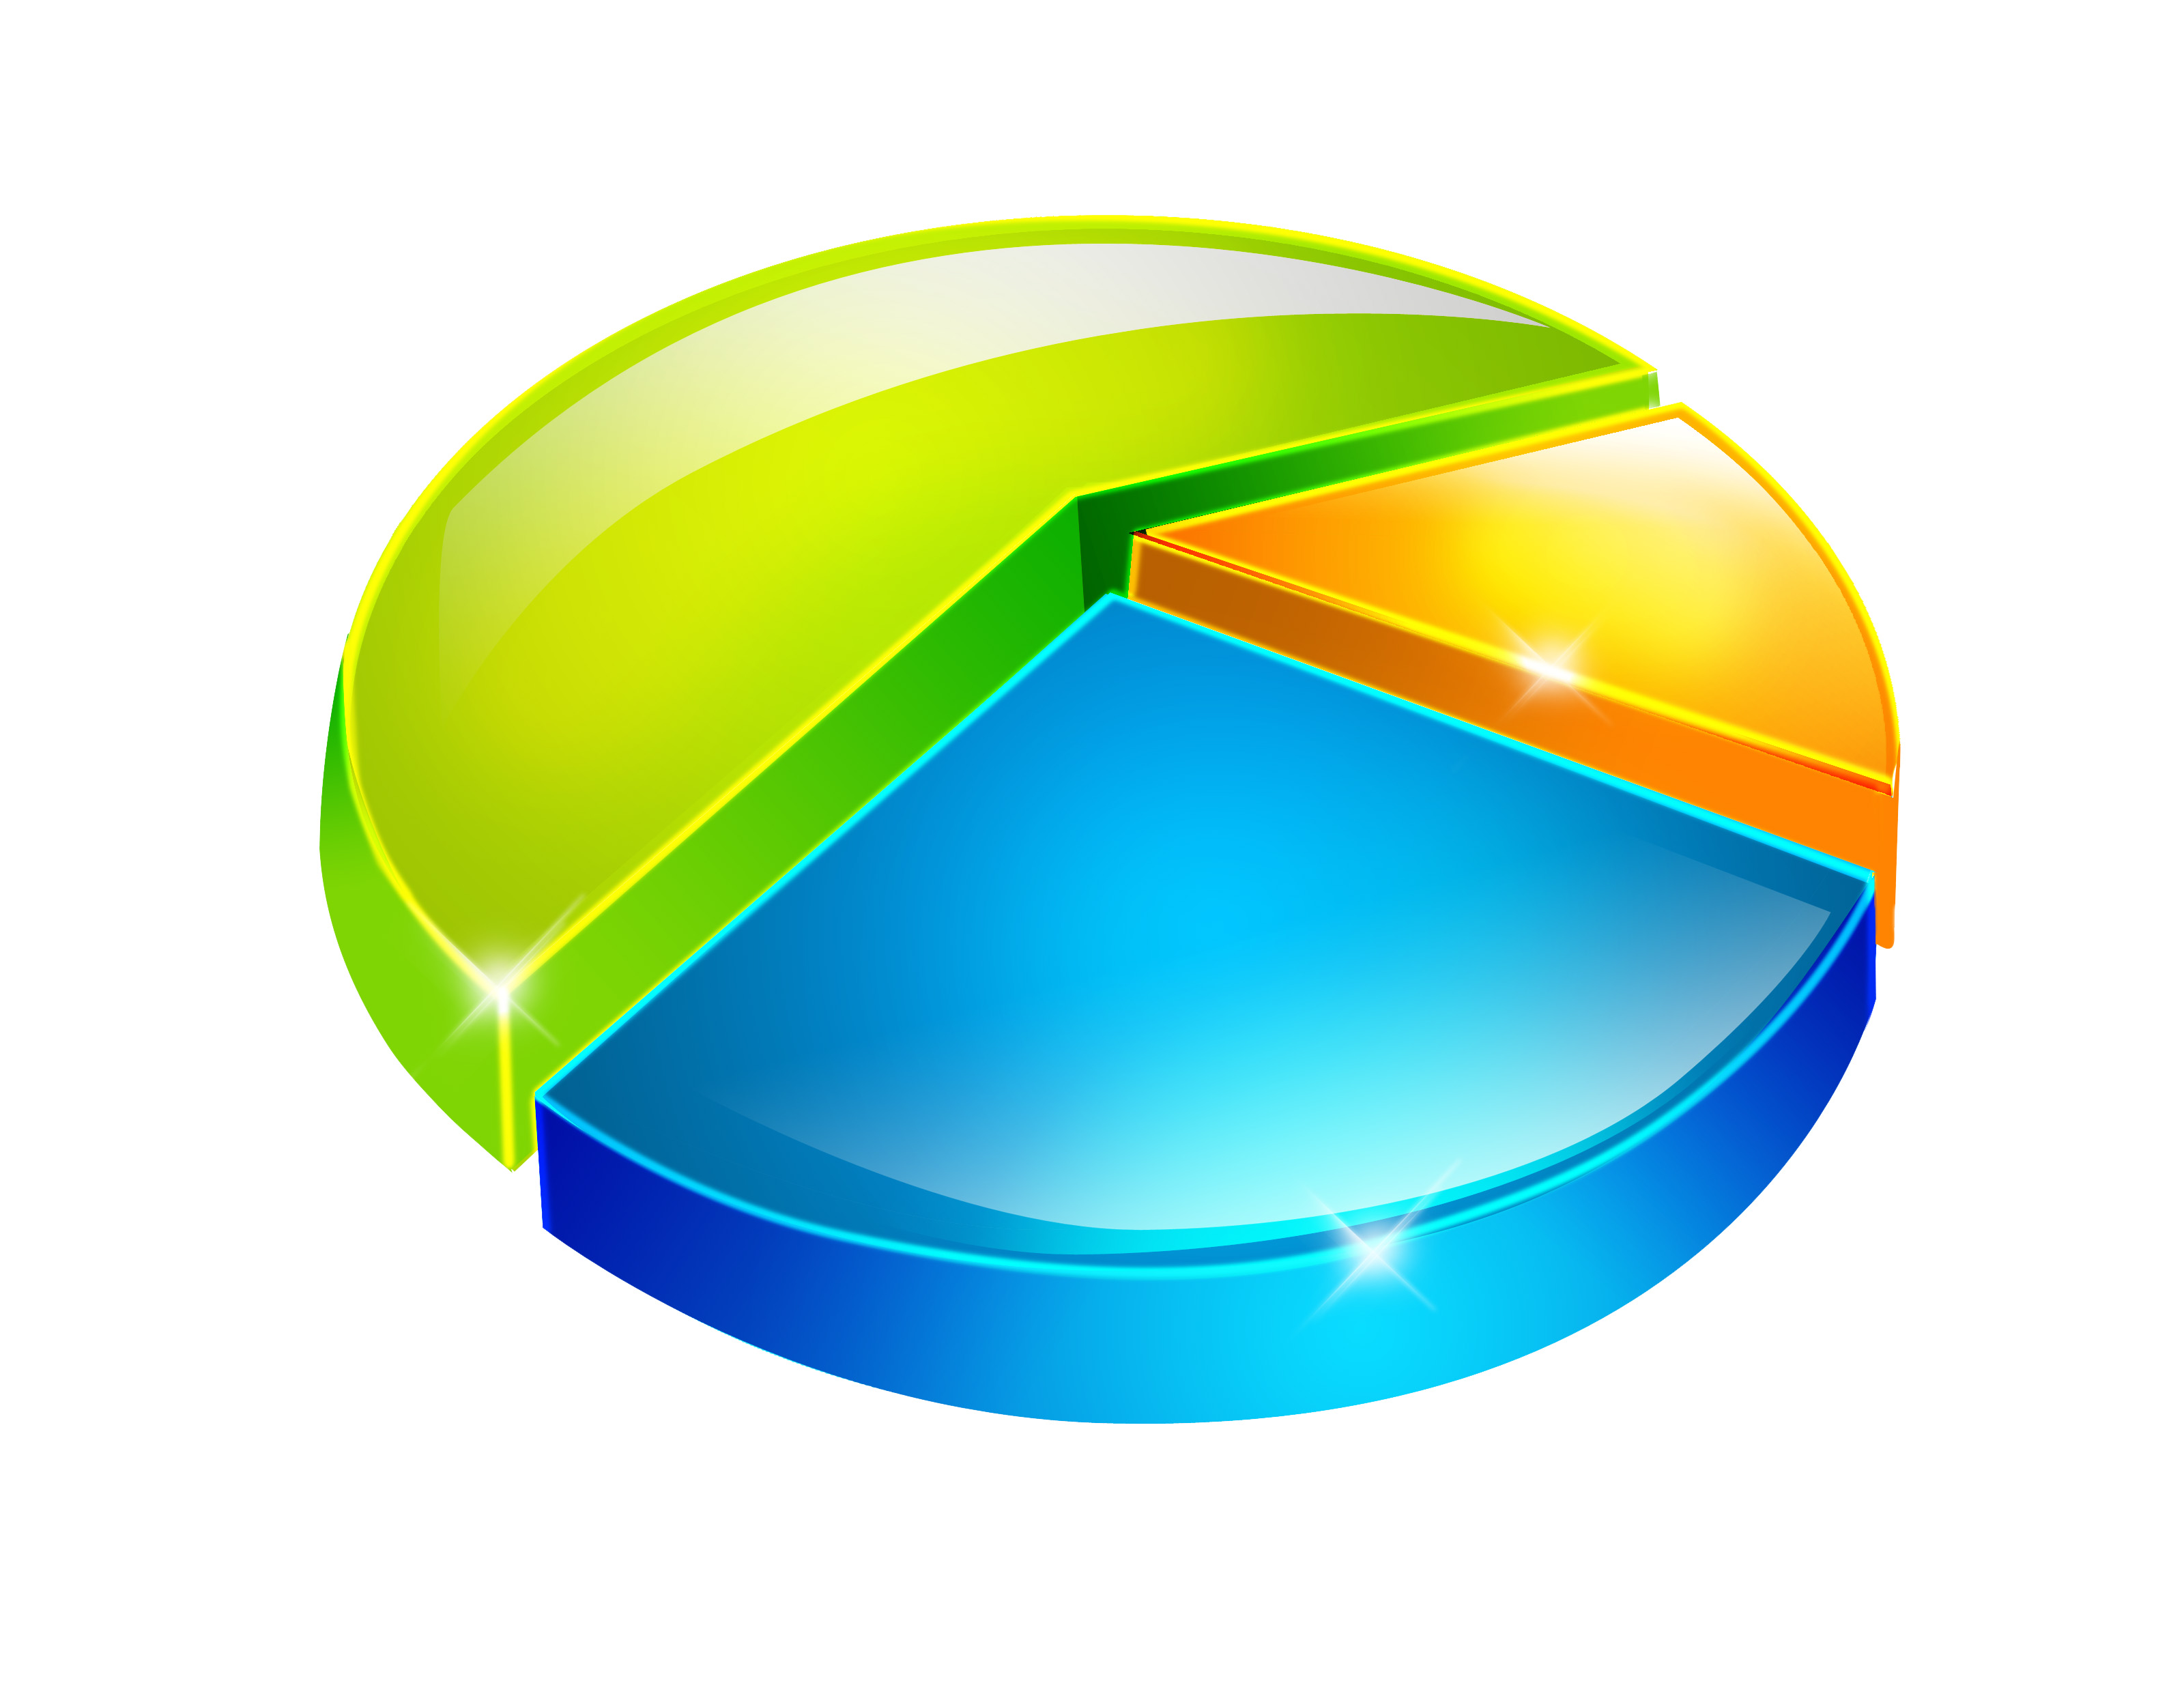 Pie Chart Free Cliparts That You Can Download To You Computer And